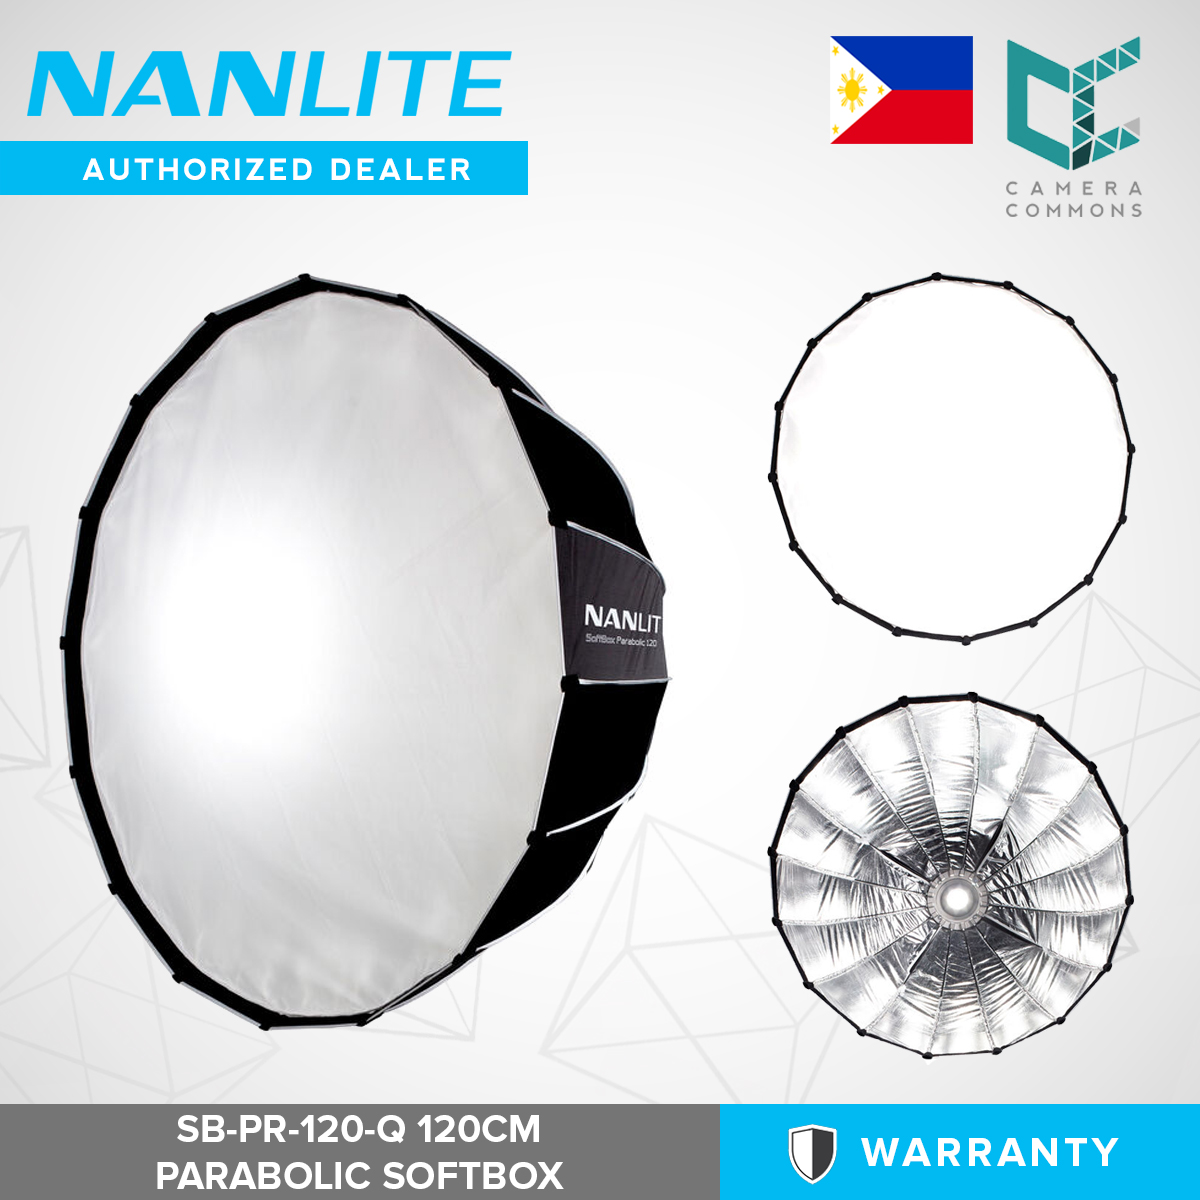 Nanlite 120 120cm Quick-Open Parabolic Softbox with Bowens Mount